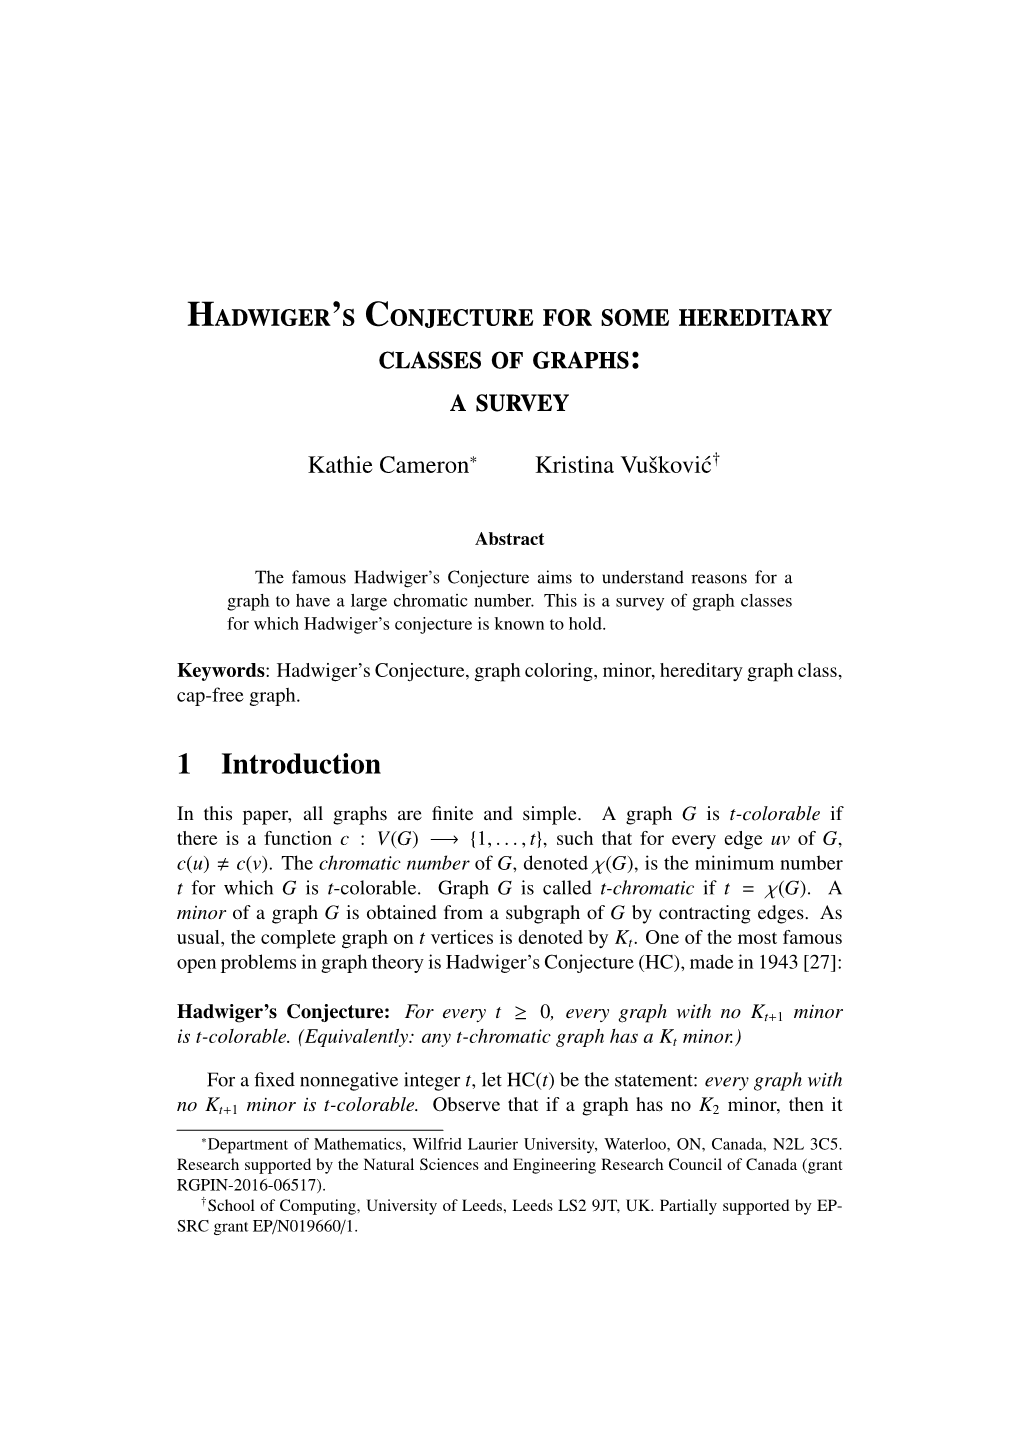 Hadwiger's Conjecture for Some Hereditary Classes of Graphs: a Survey